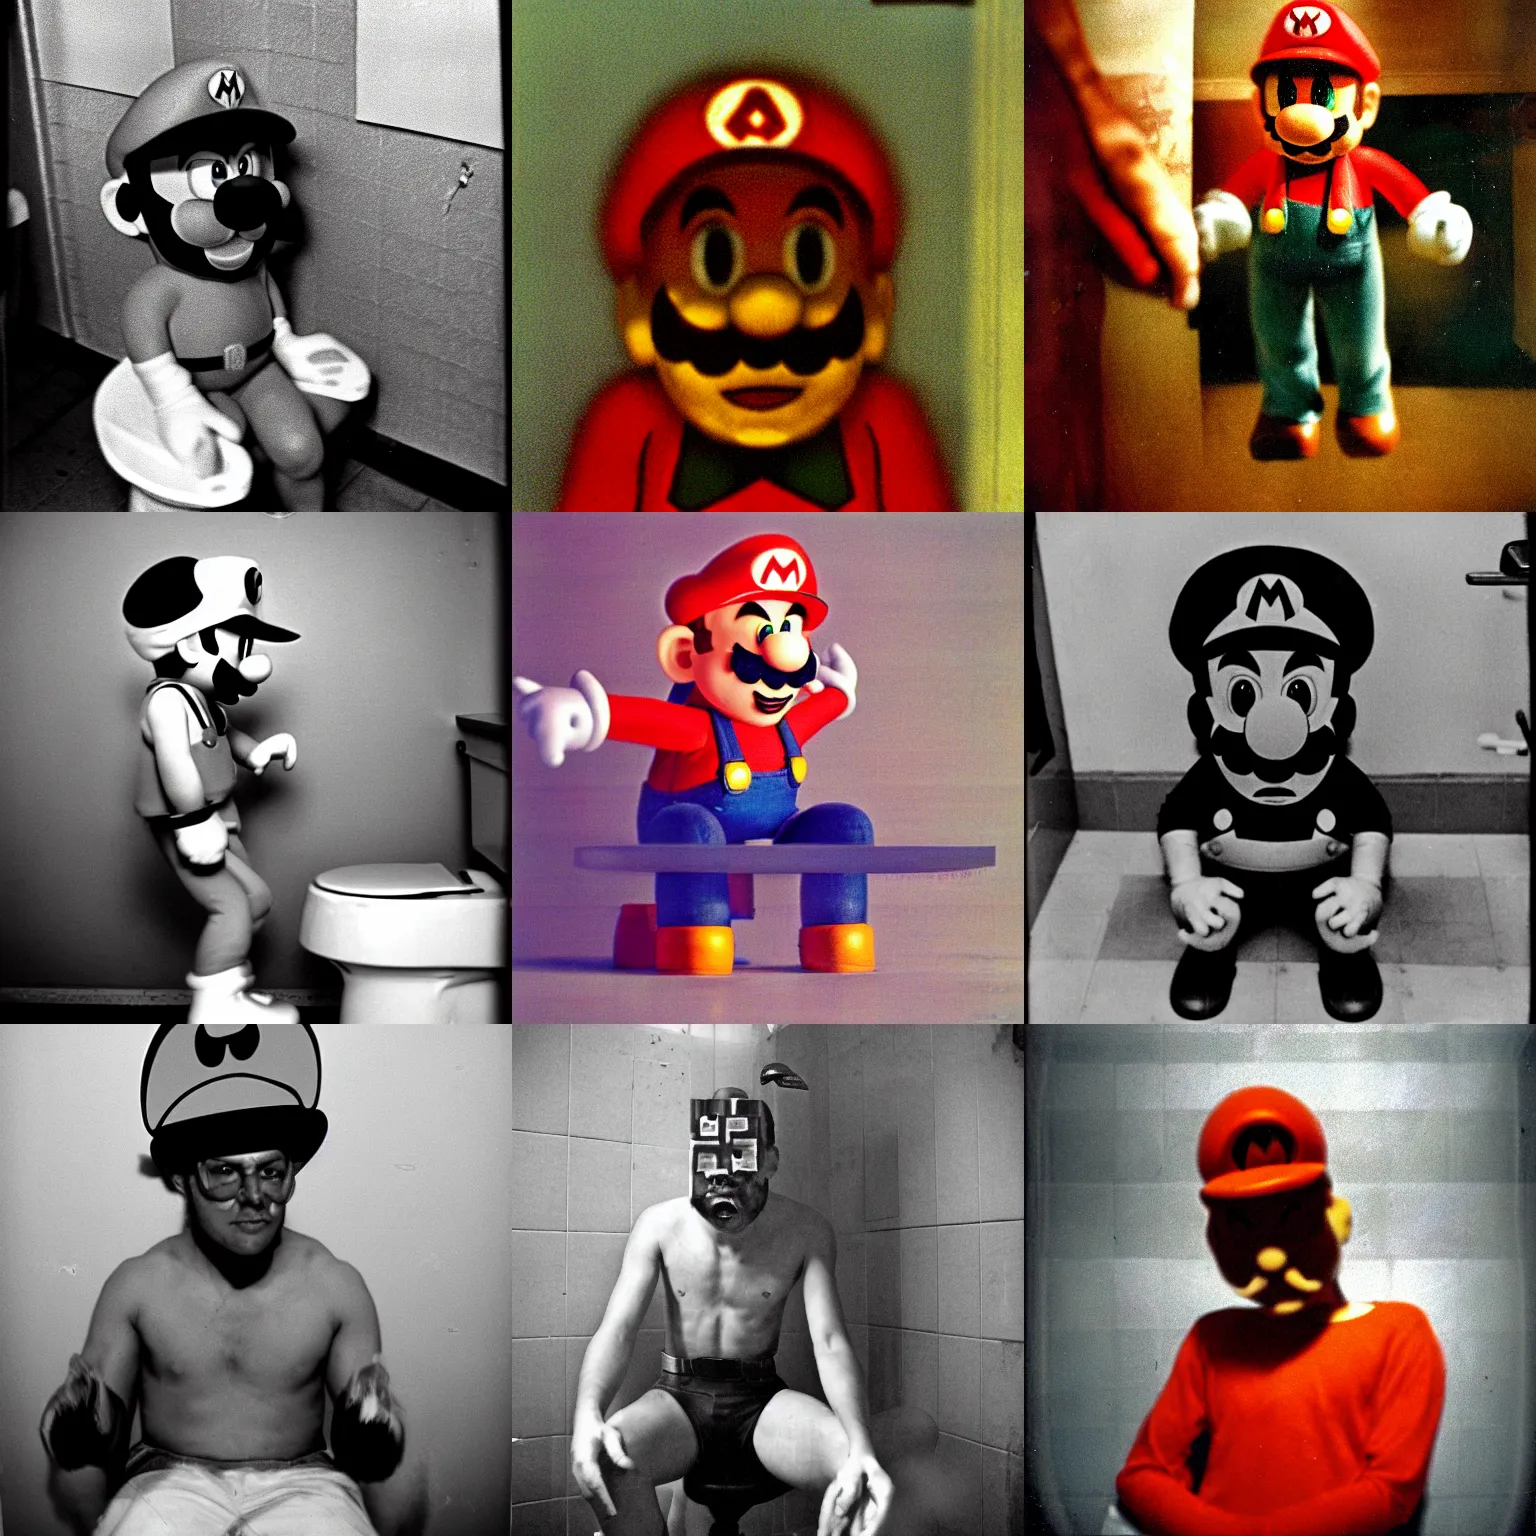 Prompt: 35mm pentax k1000 photograph grainy abstract experimental expired film photo of real human Video Game Character Super Mario, bored and angry sitting on a toilet, in 1960s New York